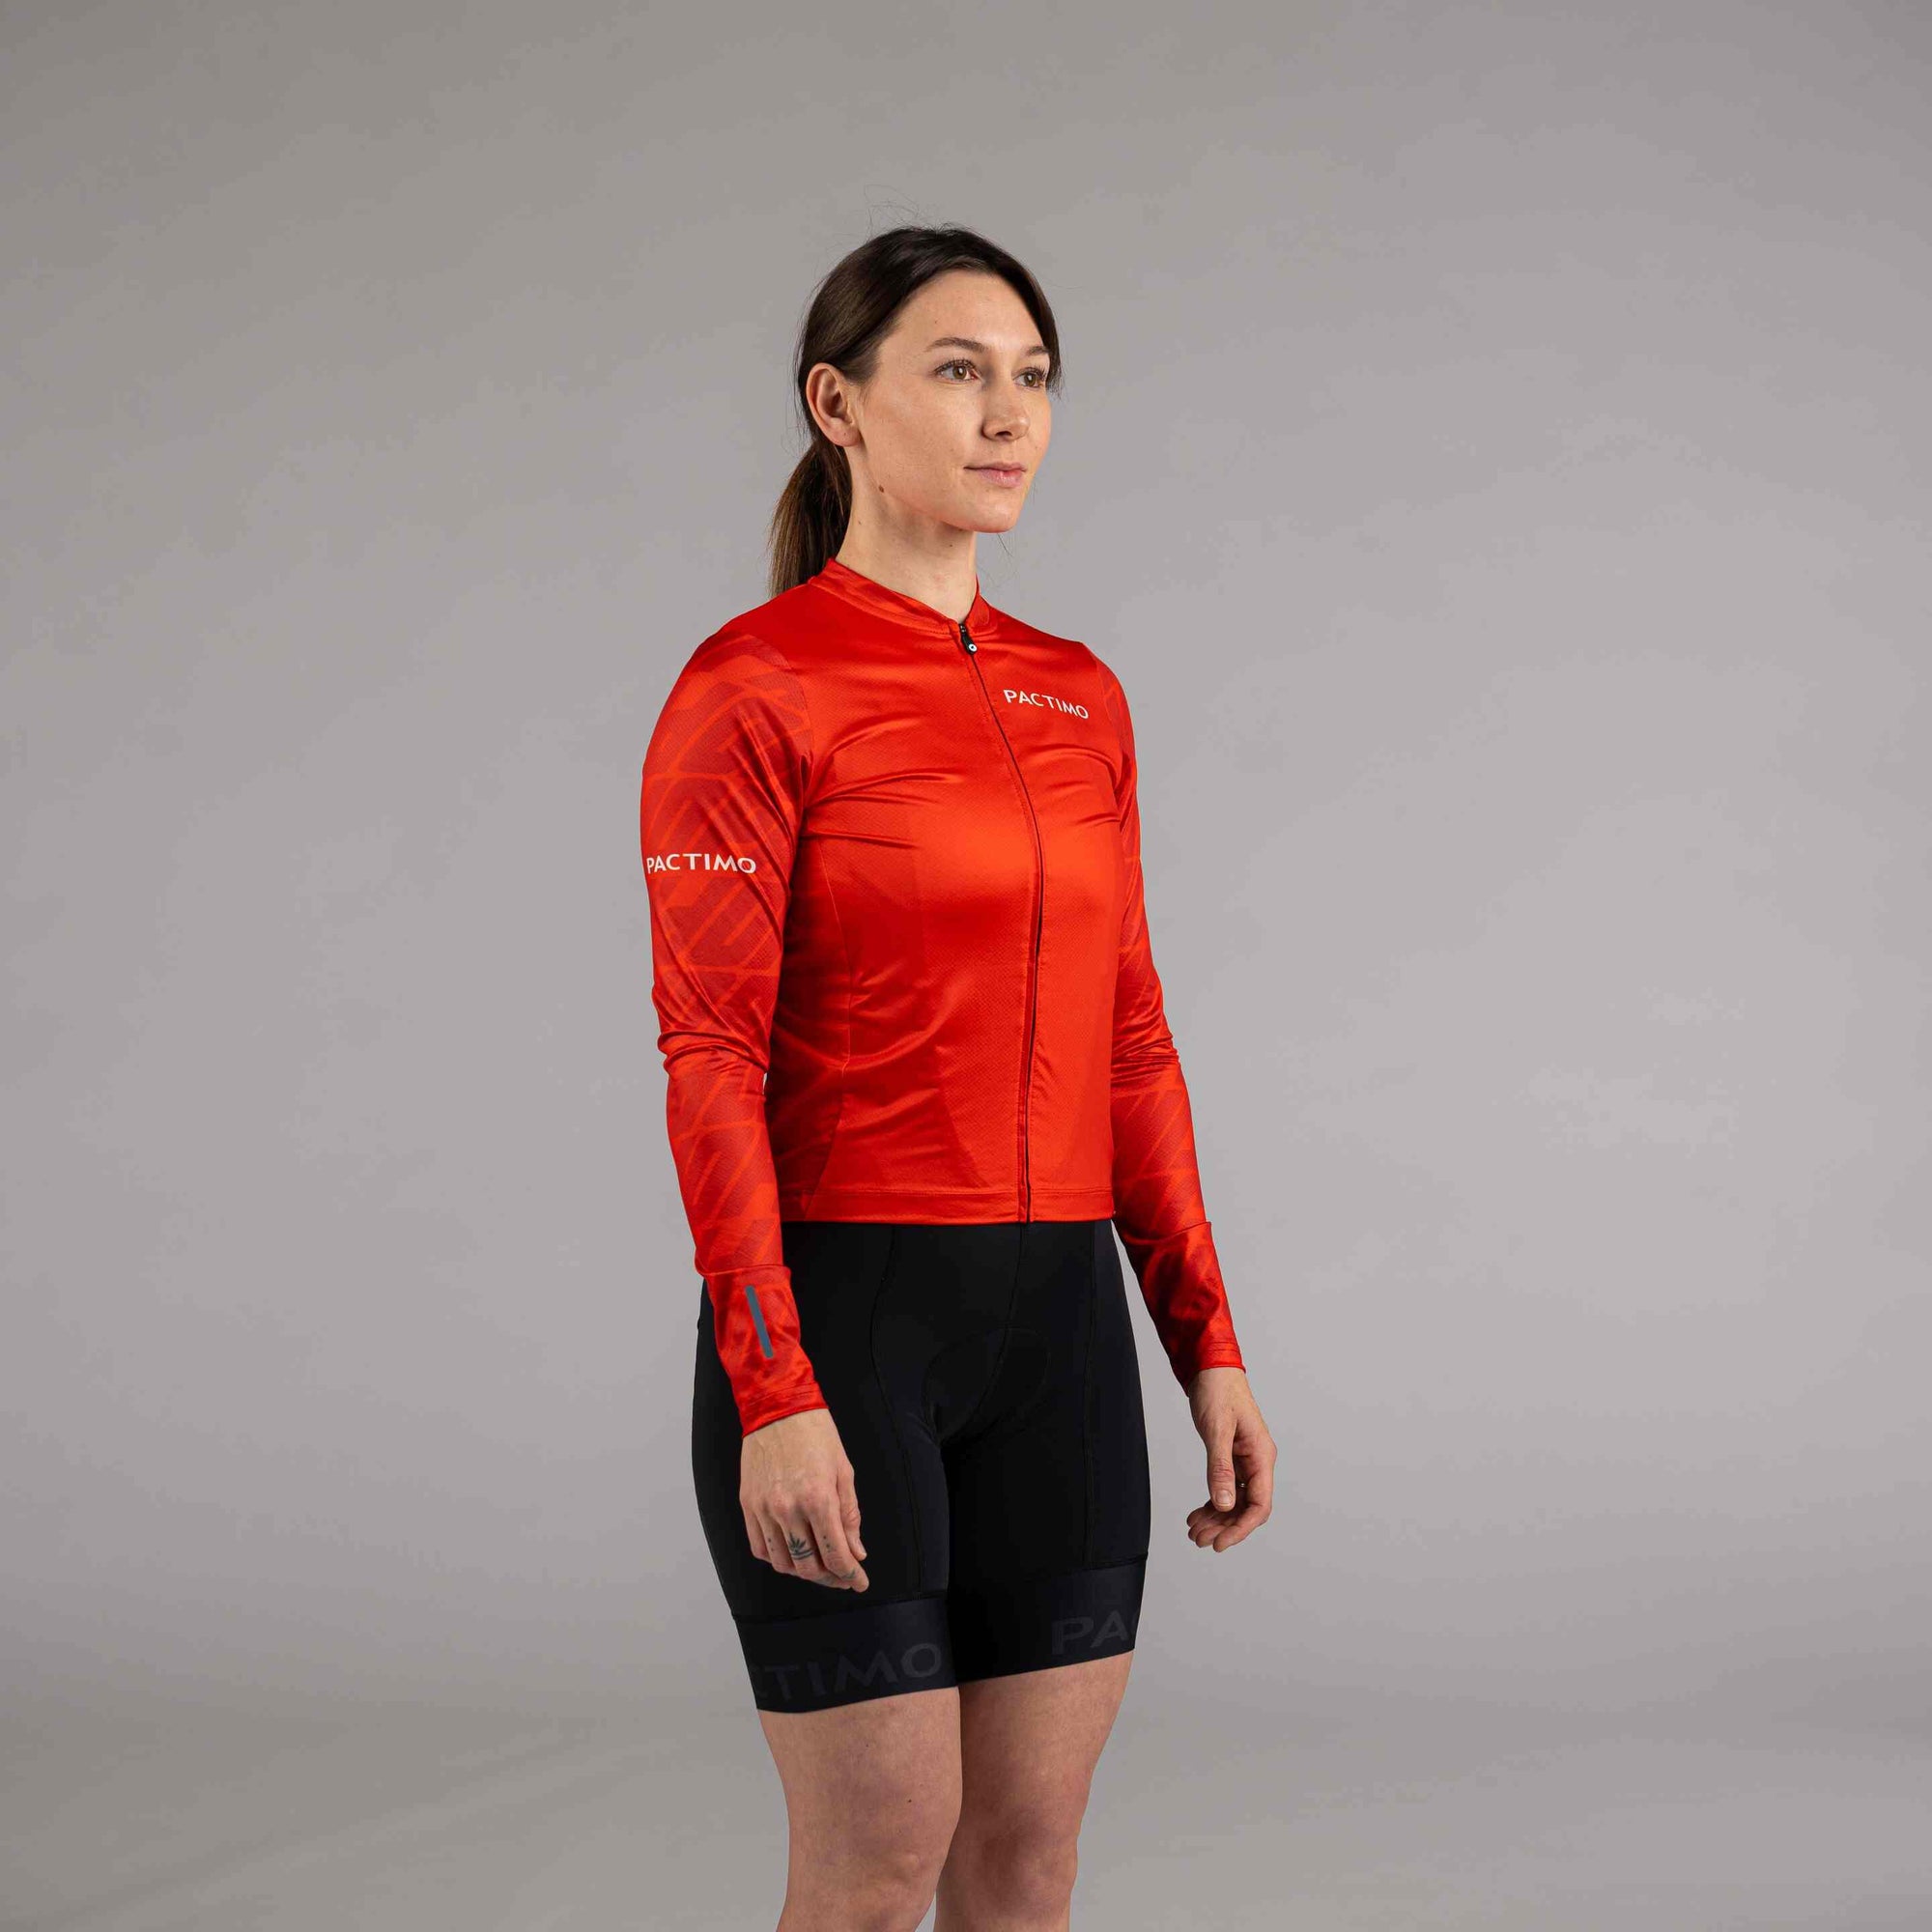 Women's Ascent Long Sleeve Cycling Jersey - Comparison